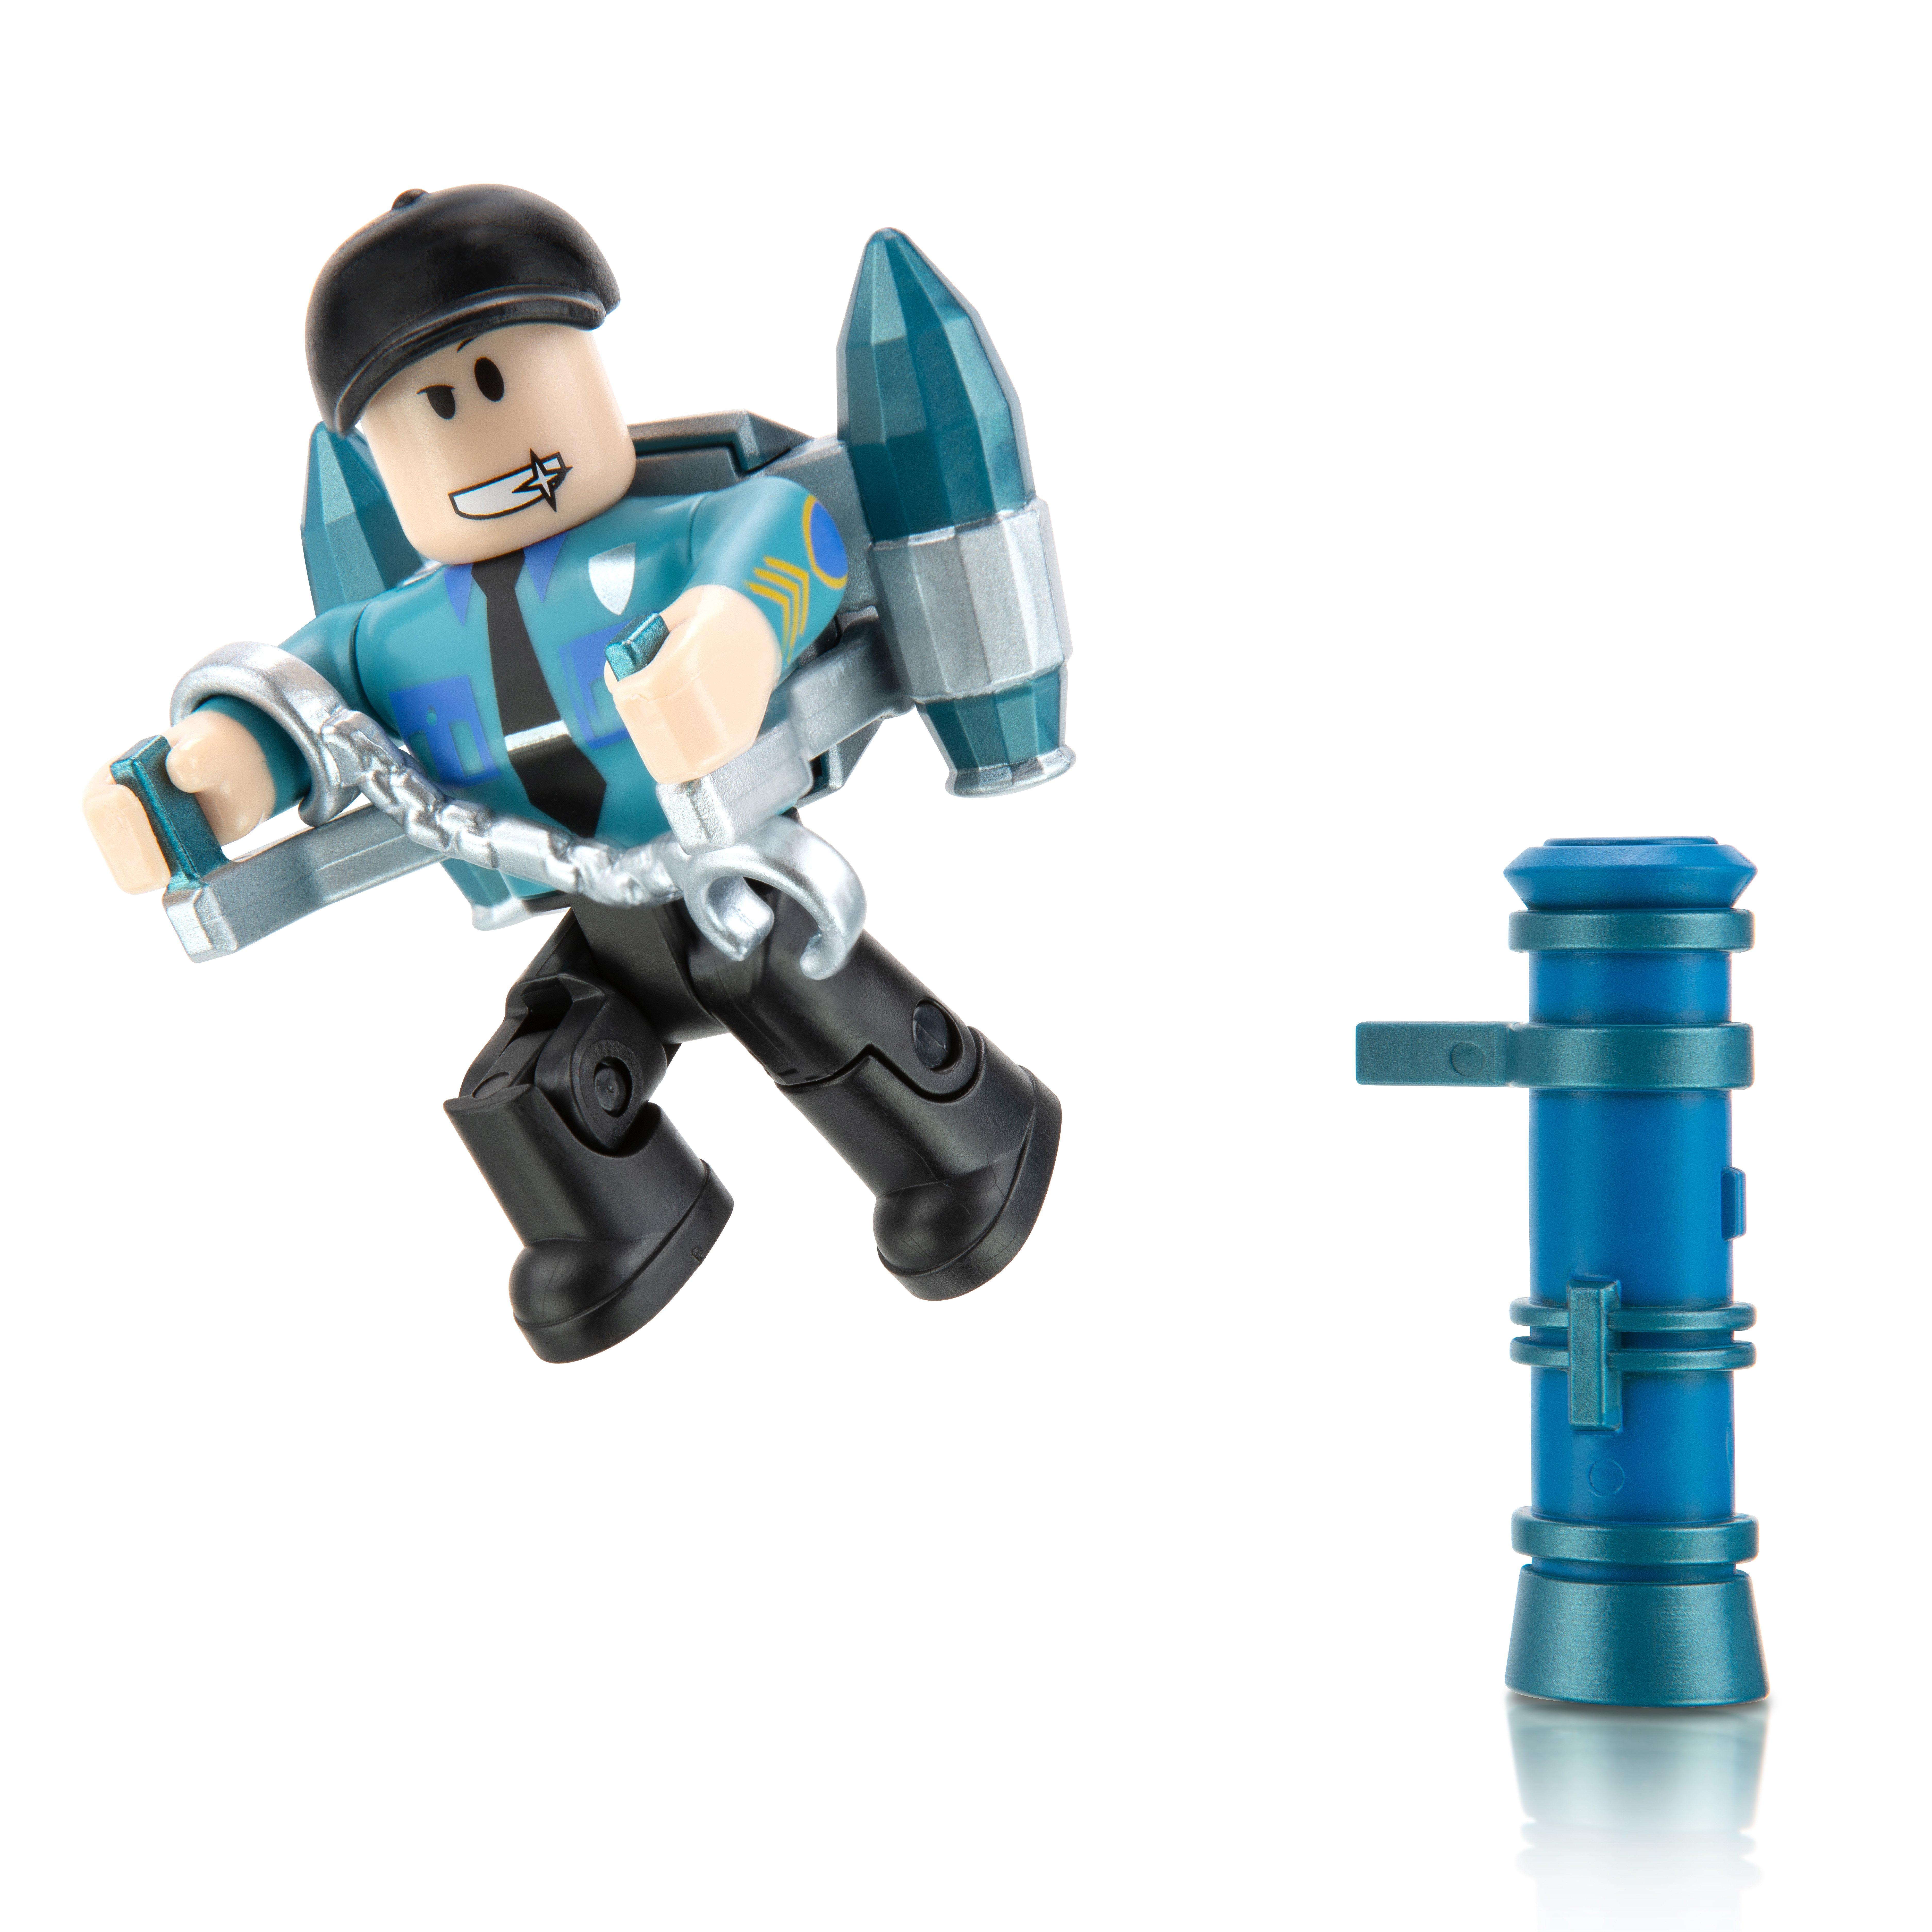 Roblox Action Collection Single Figure Pack Includes 1 Exclusive Virtual Item Styles May Vary Gamestop - roblox xbox 360 gamestop